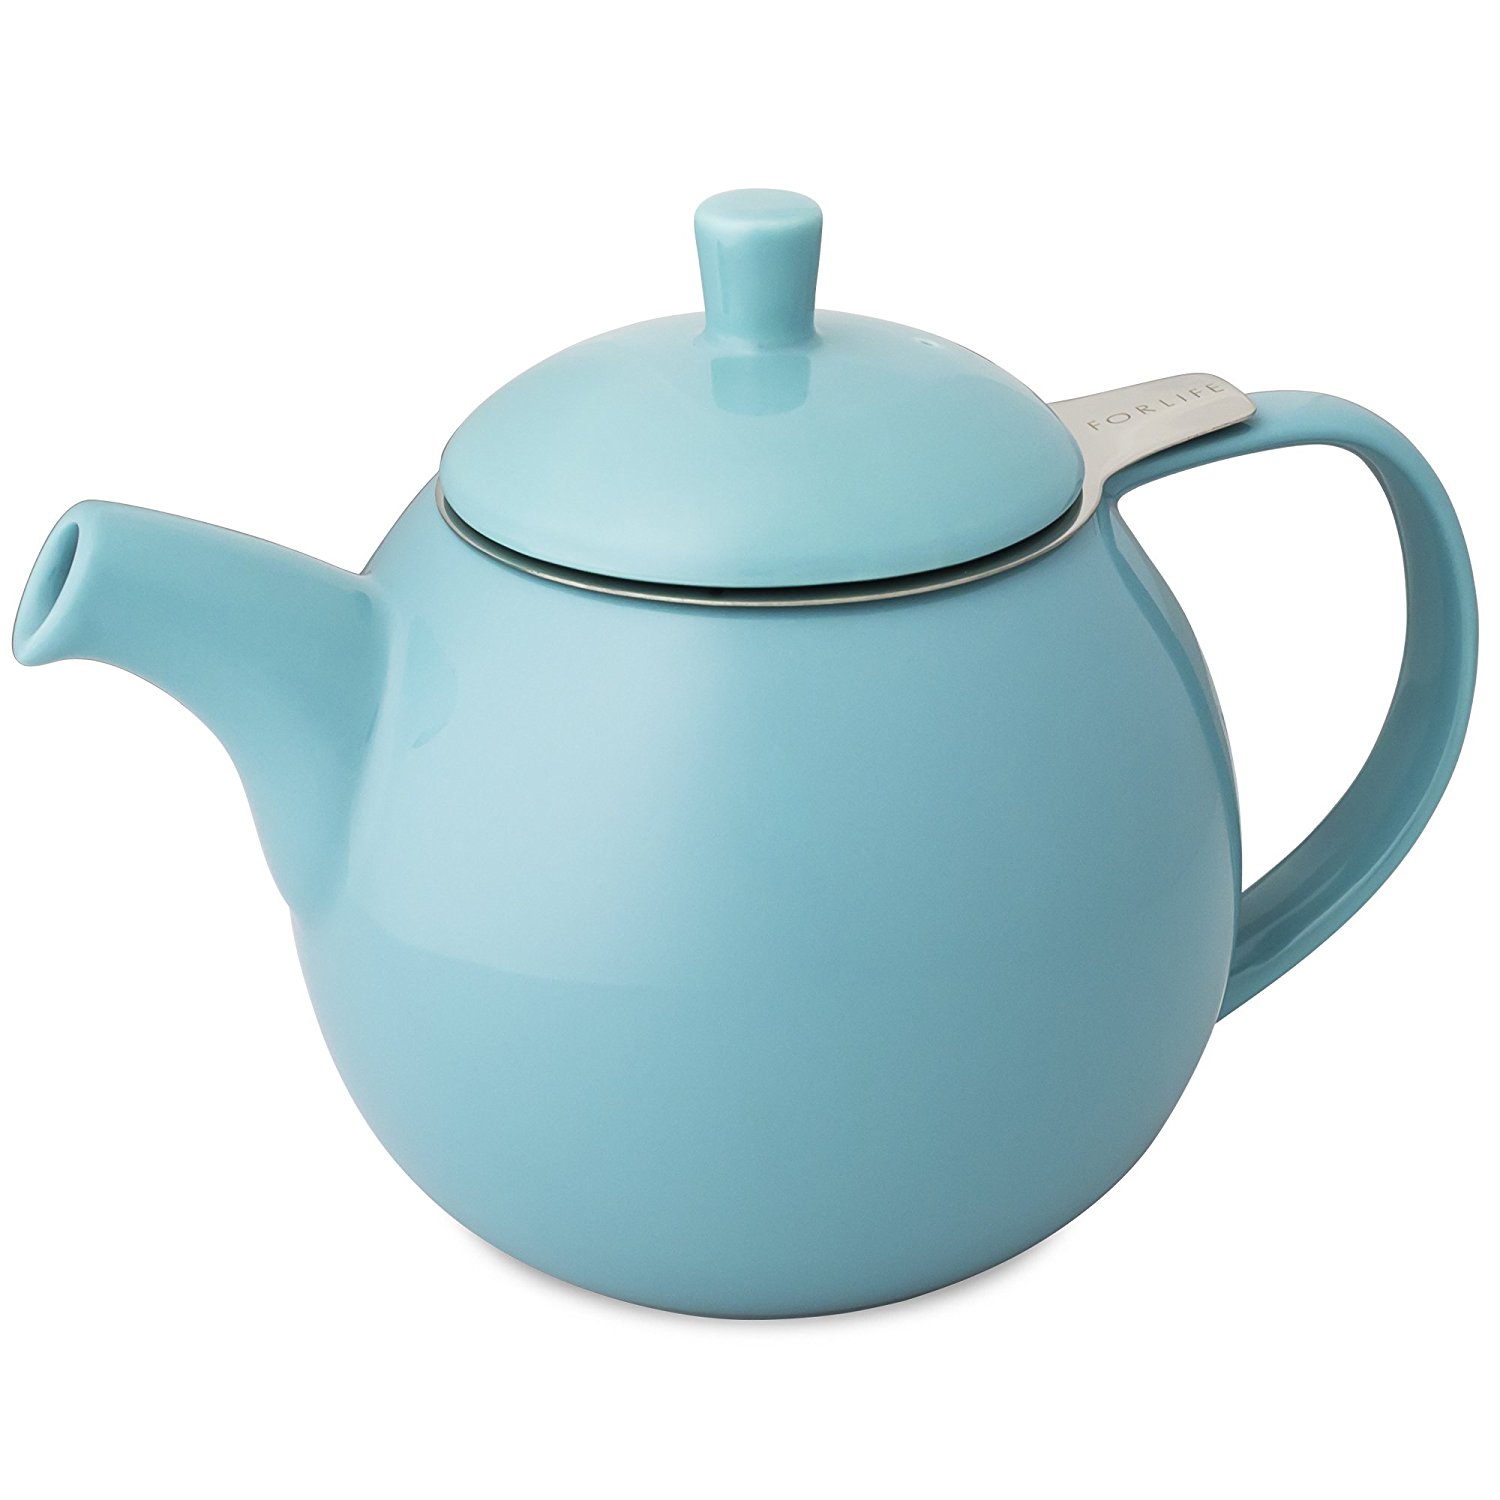 Teapot Image | Free download on ClipArtMag